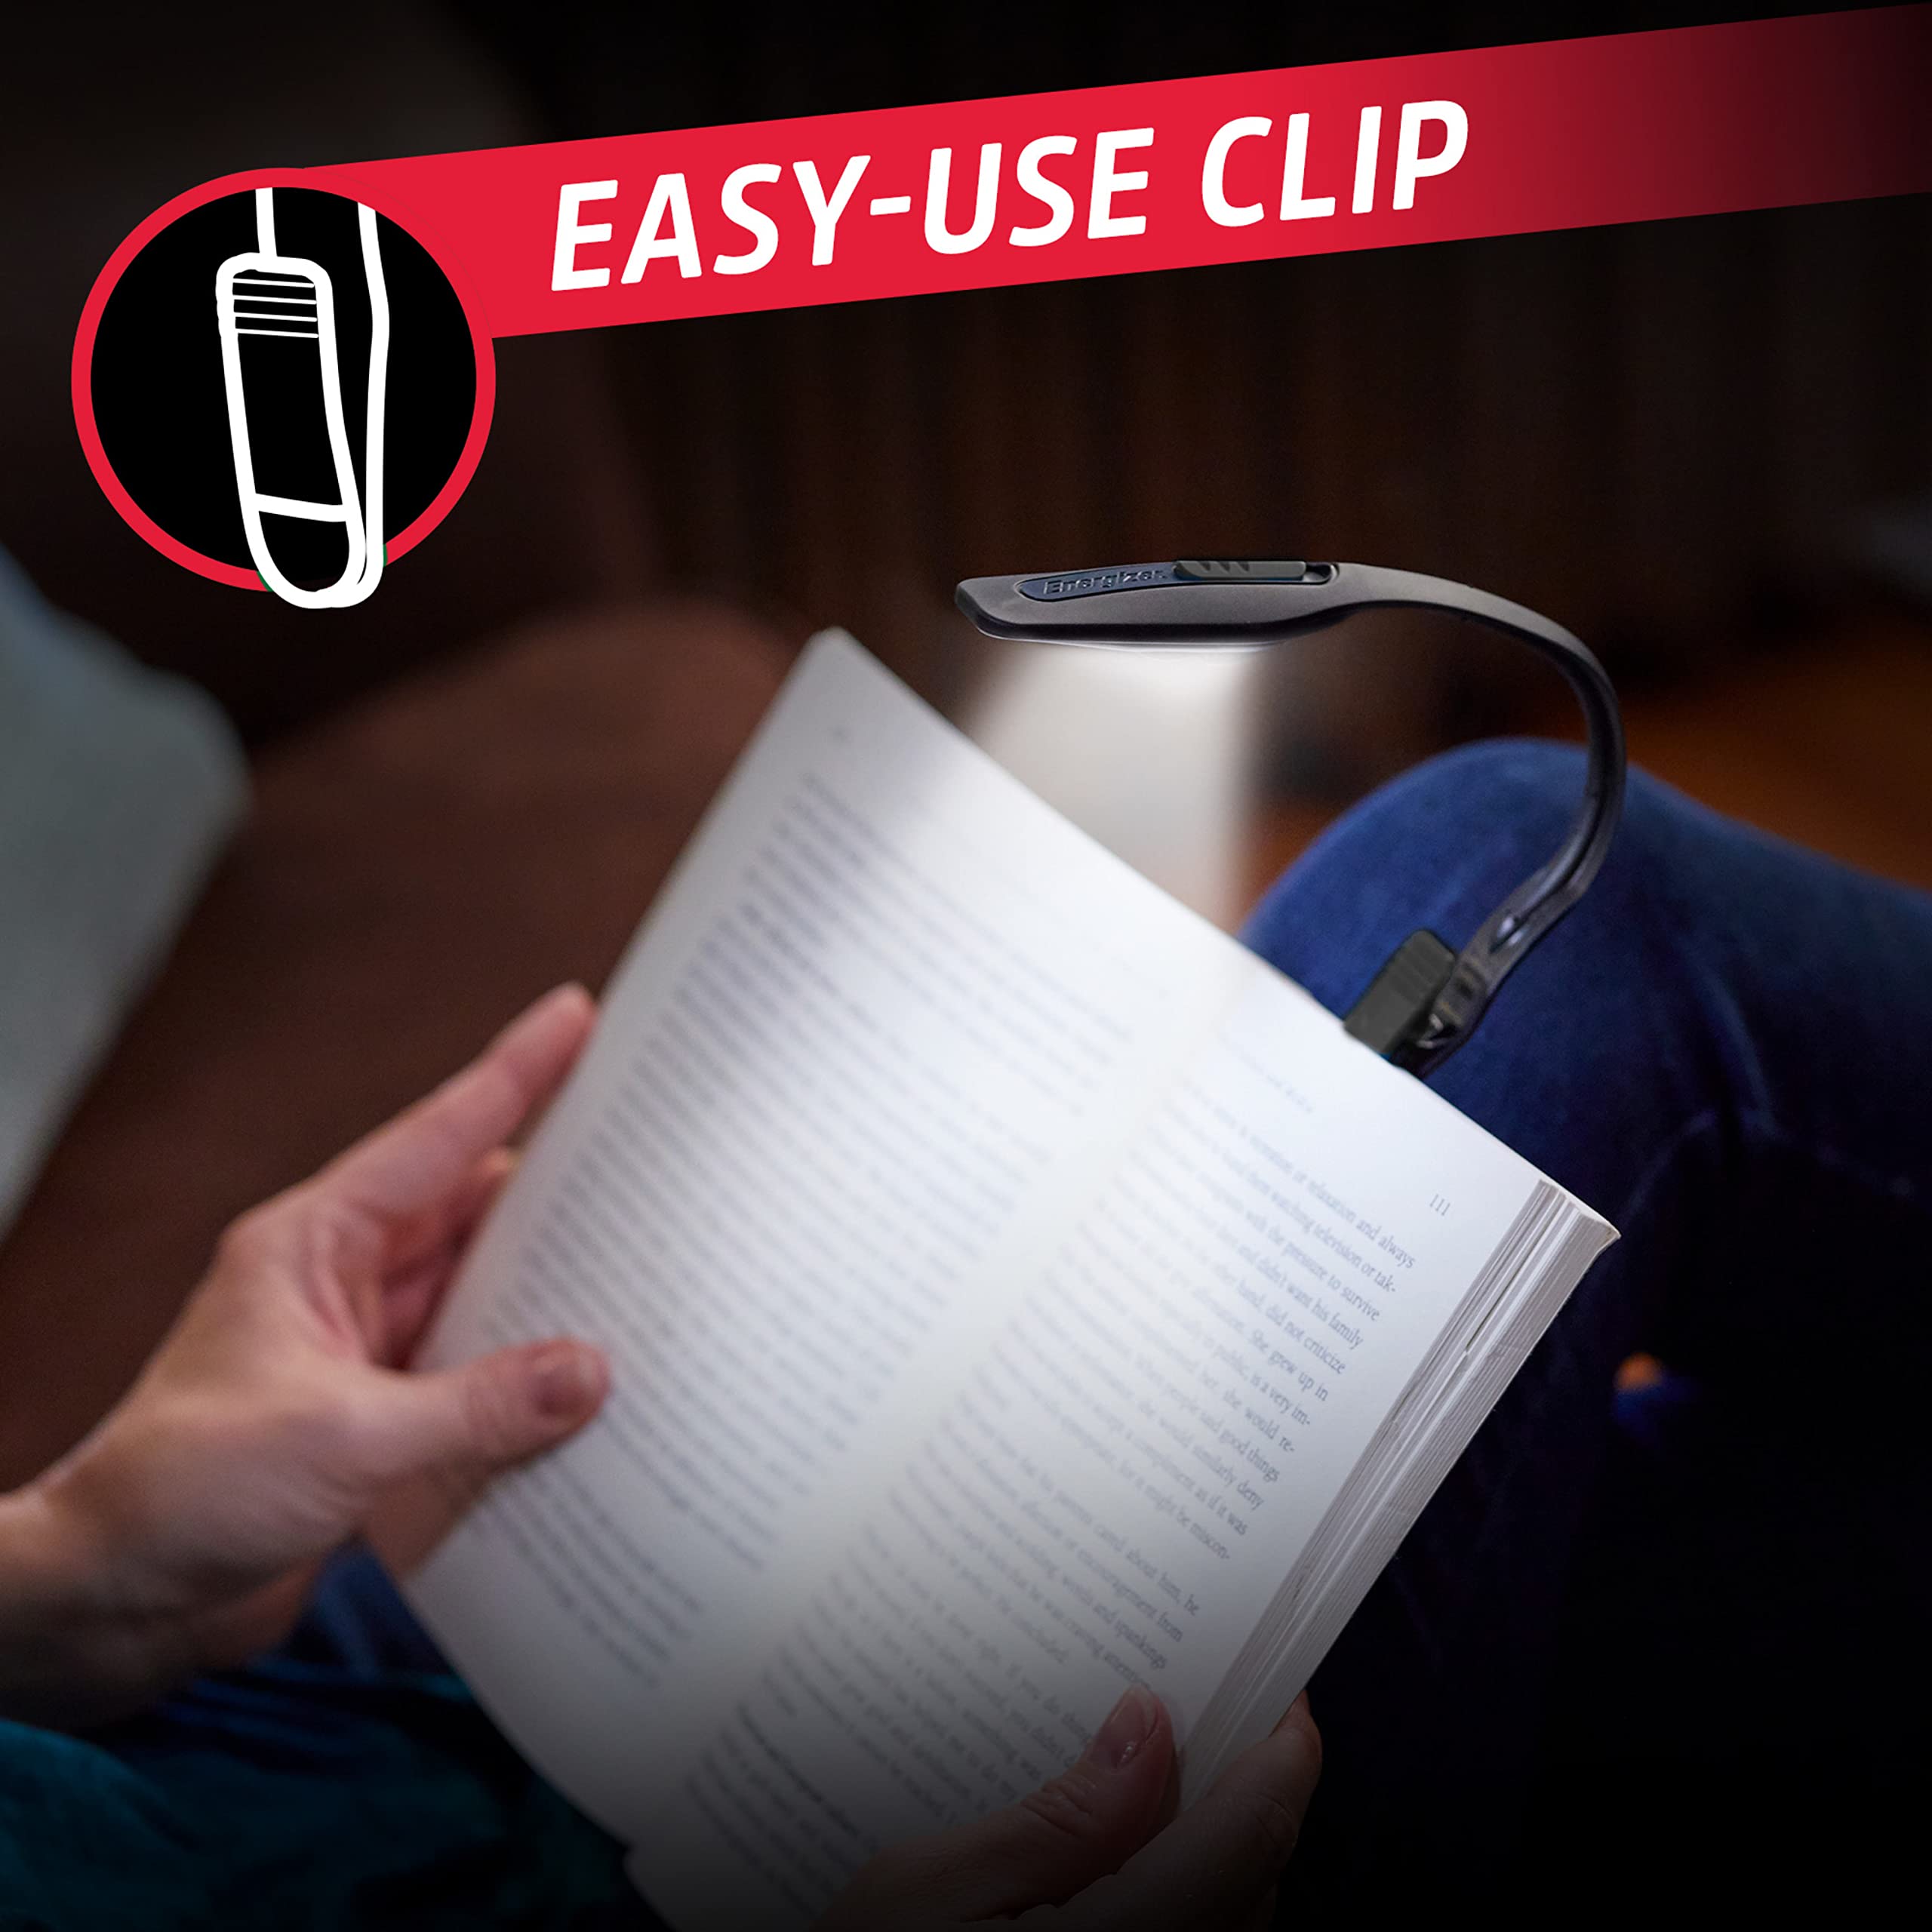 Energizer Clip-on Book Light for Reading in Bed (2-Pack), LED Reading Light for Books, Long-Lasting Run Time, Compact & Portable Kindle & Book Reading Lamp (Batteries Included)